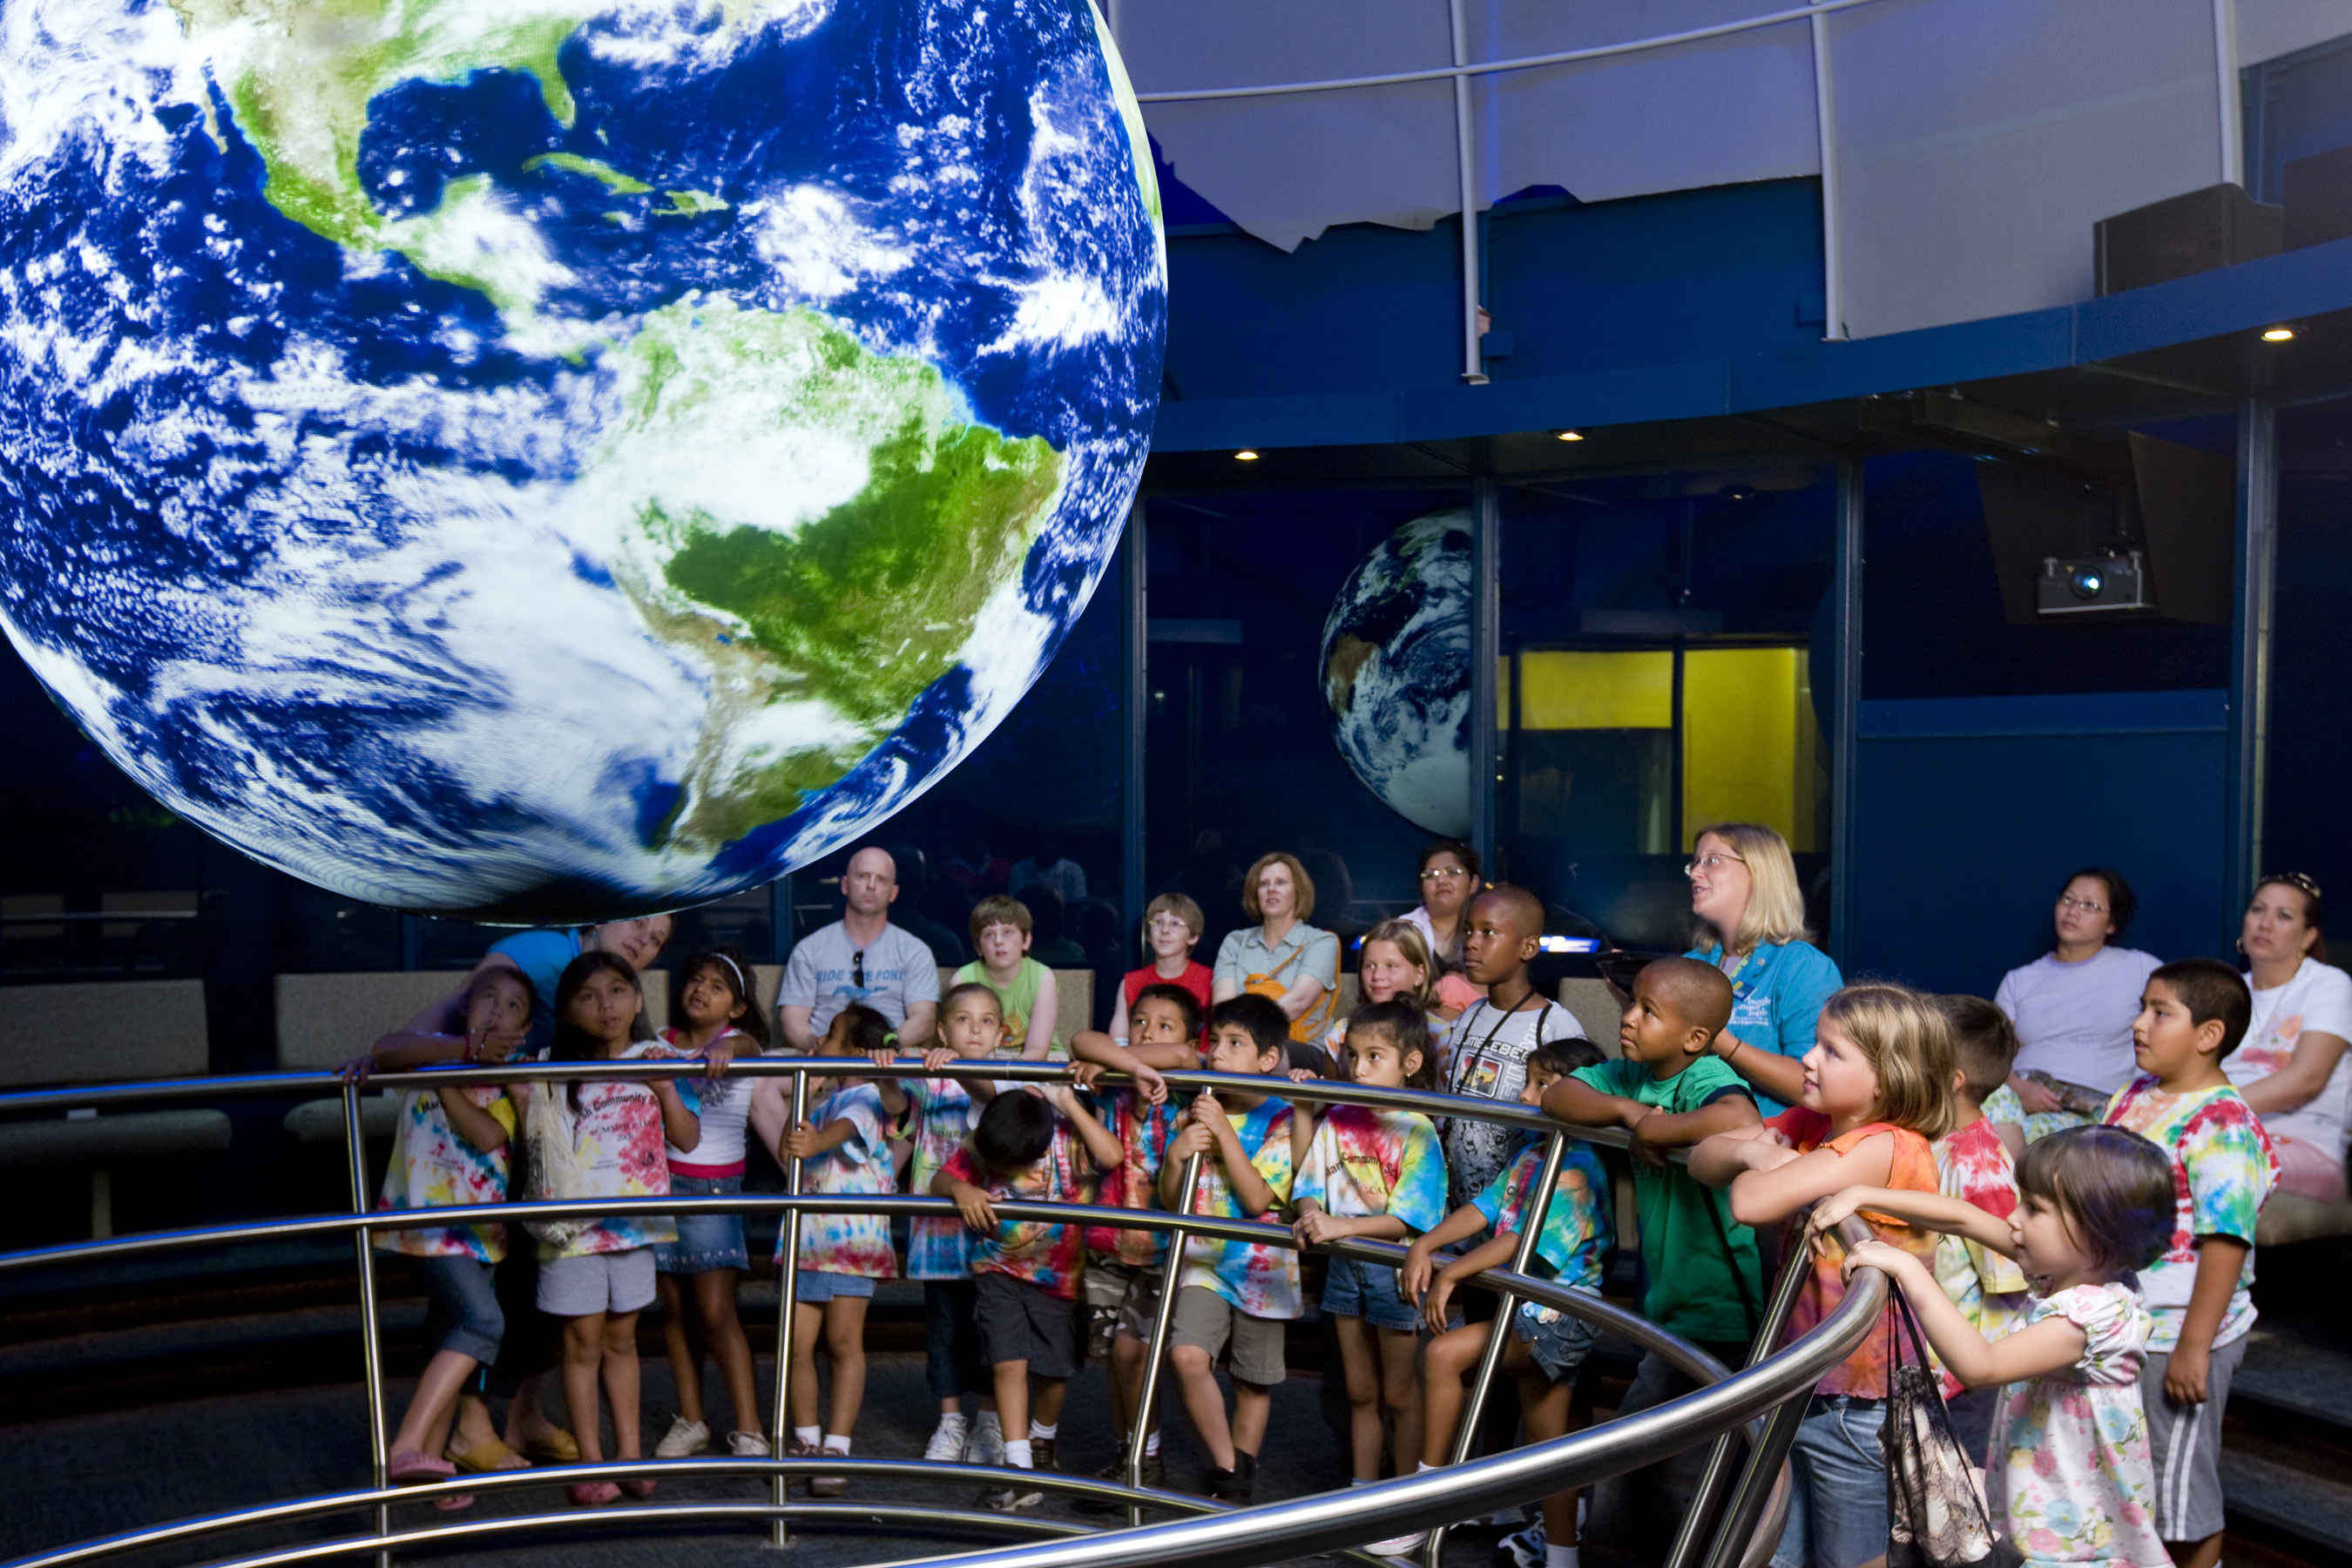 A group of school children crowd around a railing watching Science On a Sphere as a docent stands behind them giving a presentation